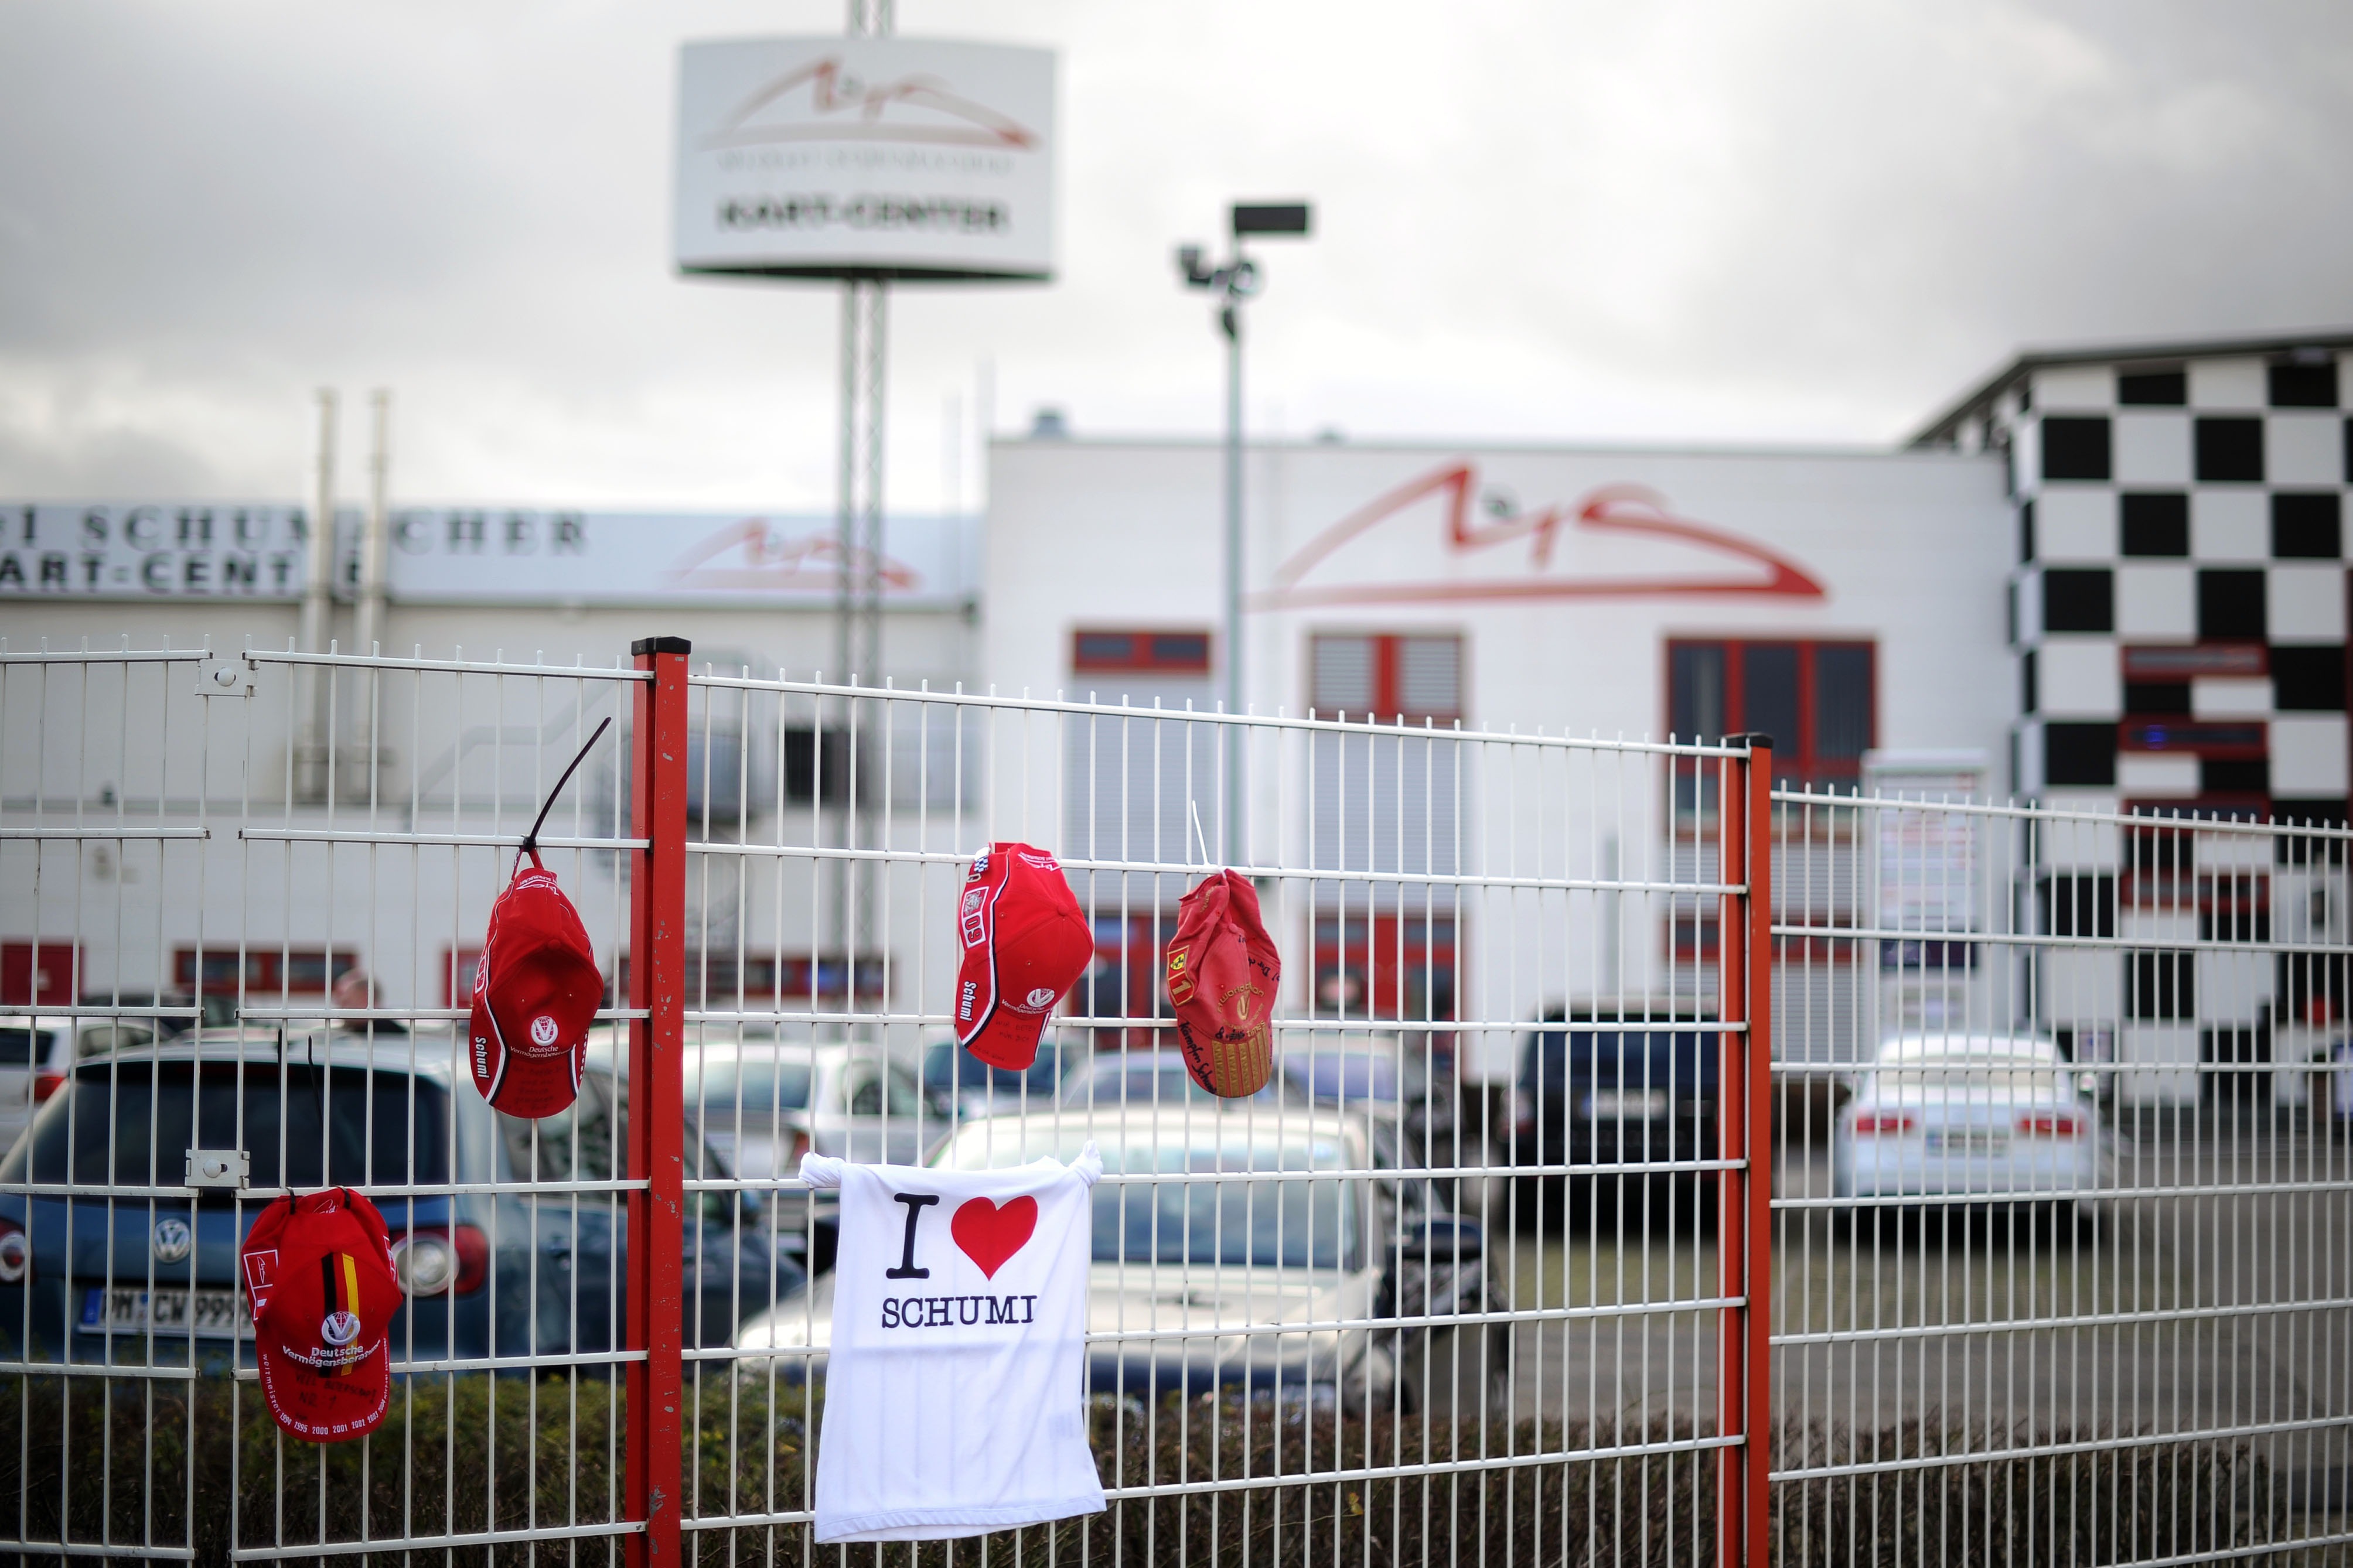 Michael Schumacher fan caps and a fan T-shirt are attached on the fence at the Michael Schumacher Cart Centre in his home town Kerpen, Germany. Photo: AP